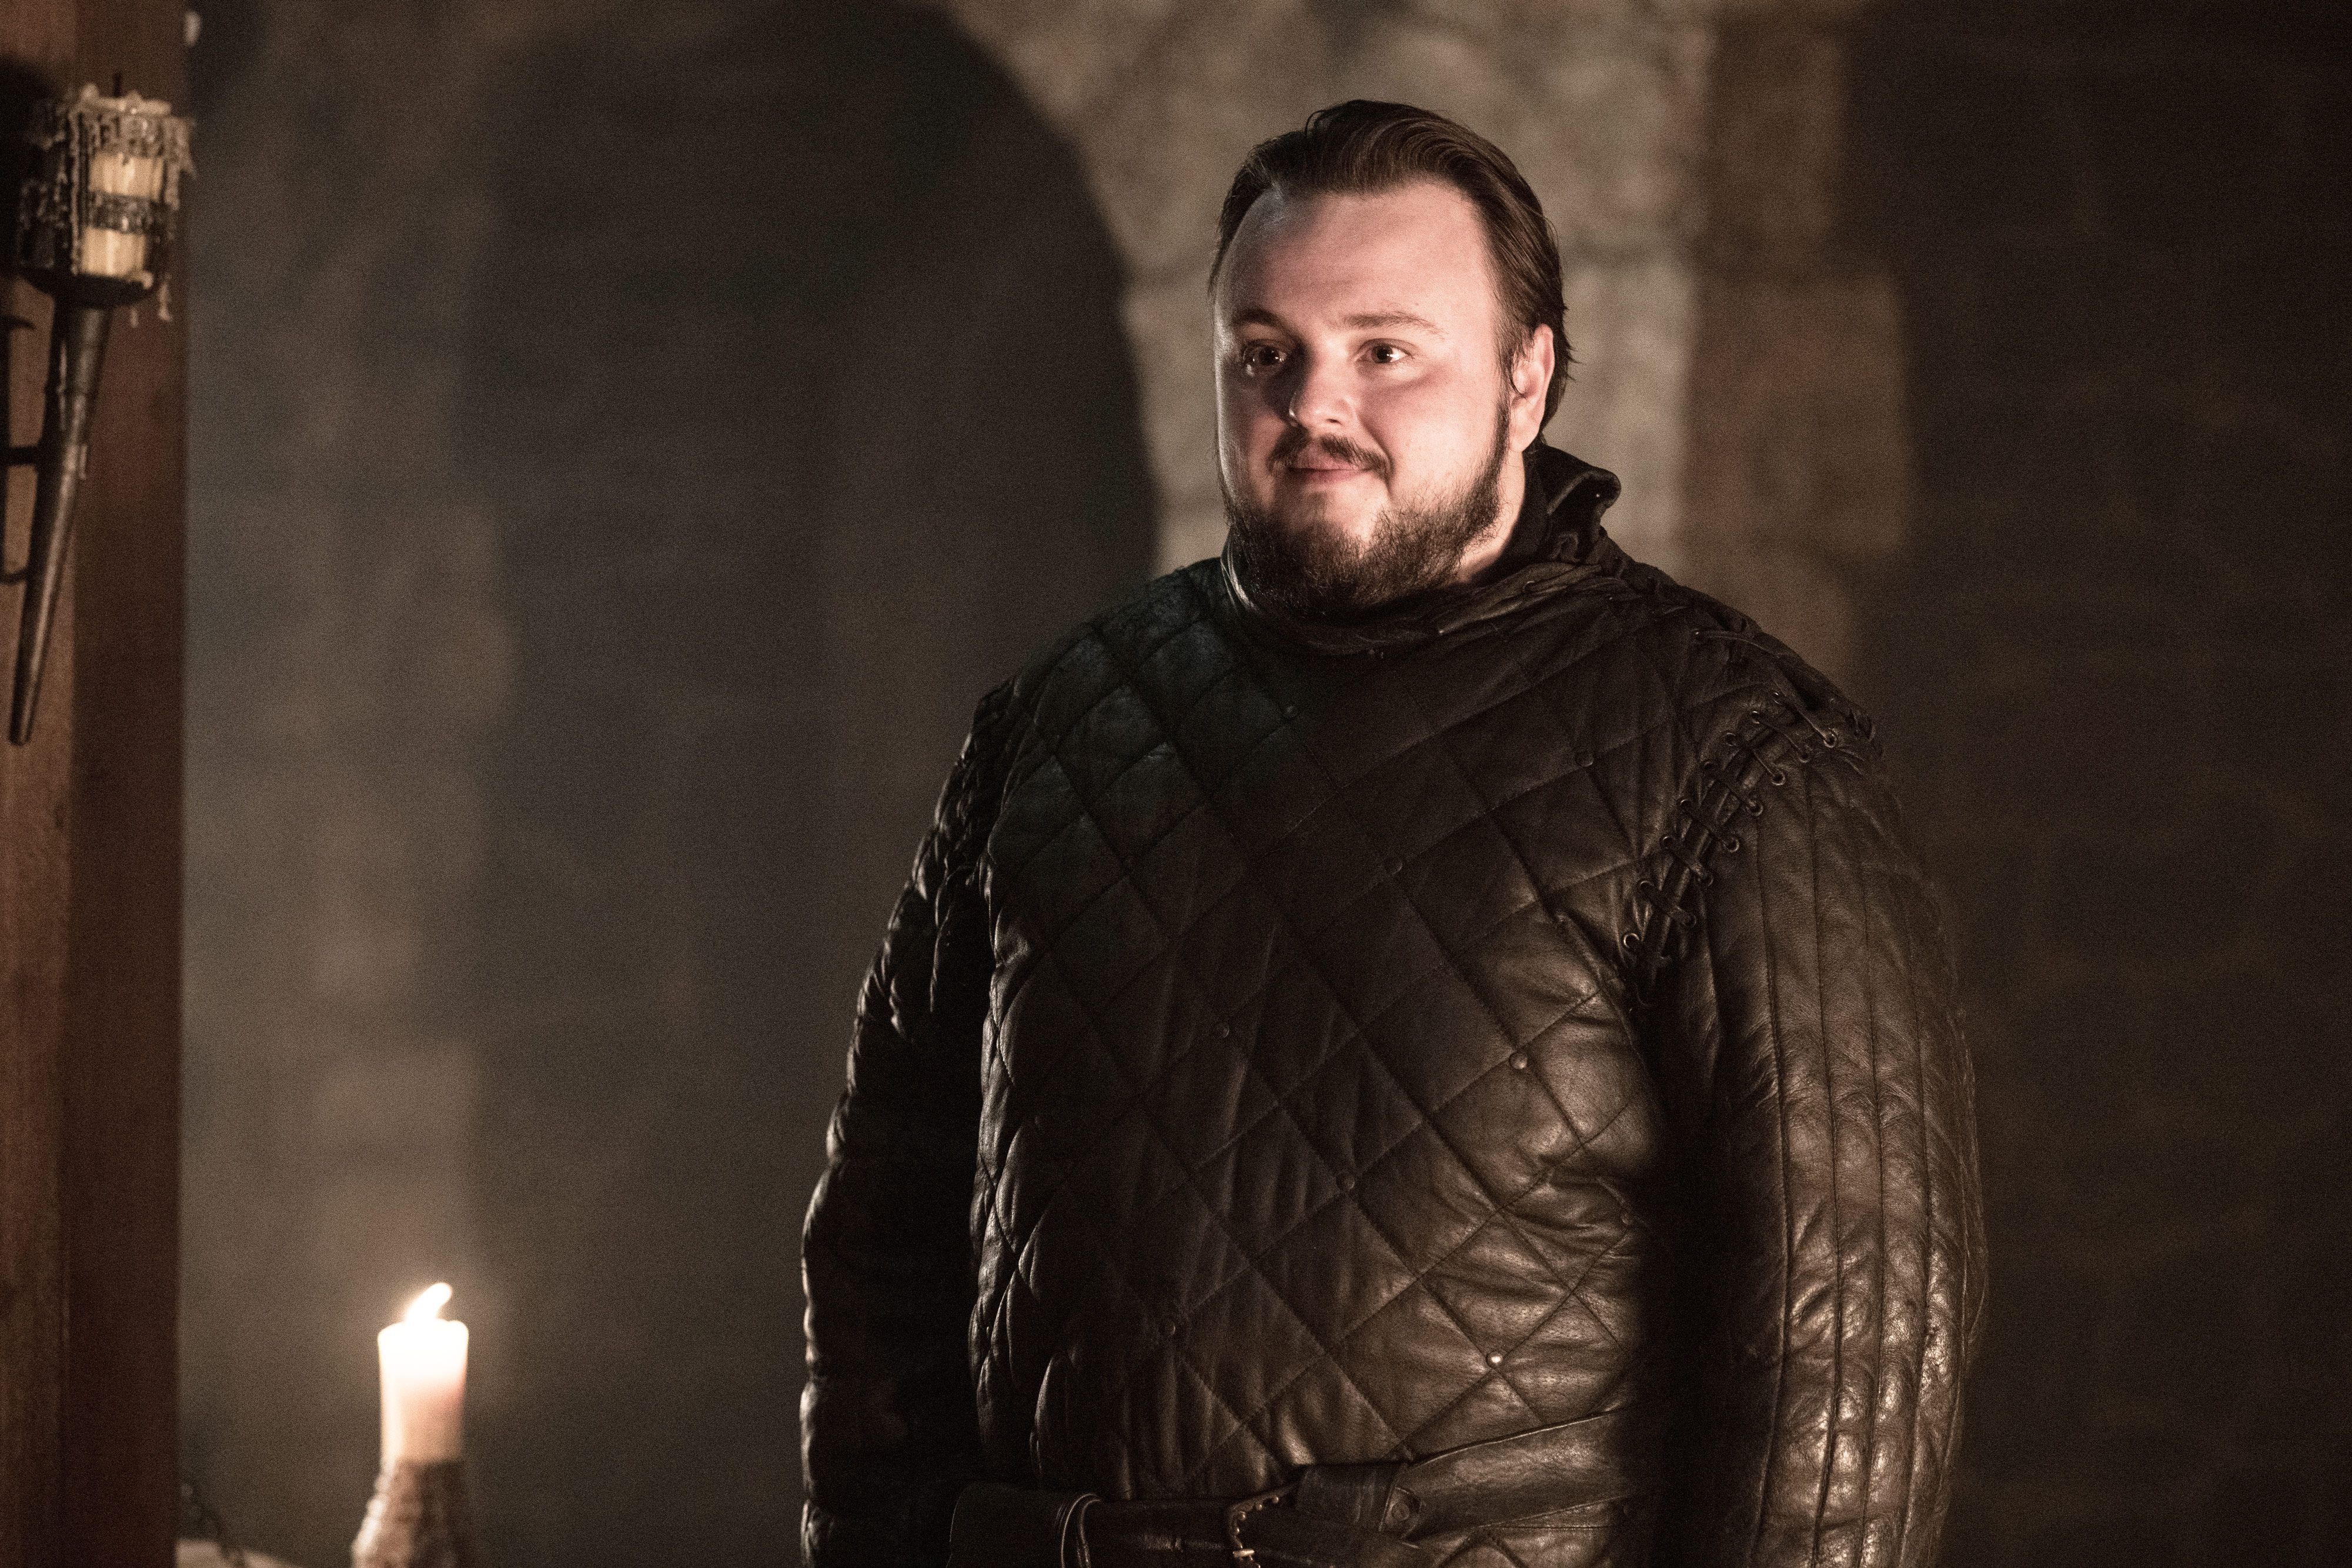 How Would You Die in “Game of Thrones”? Samwell Tarly